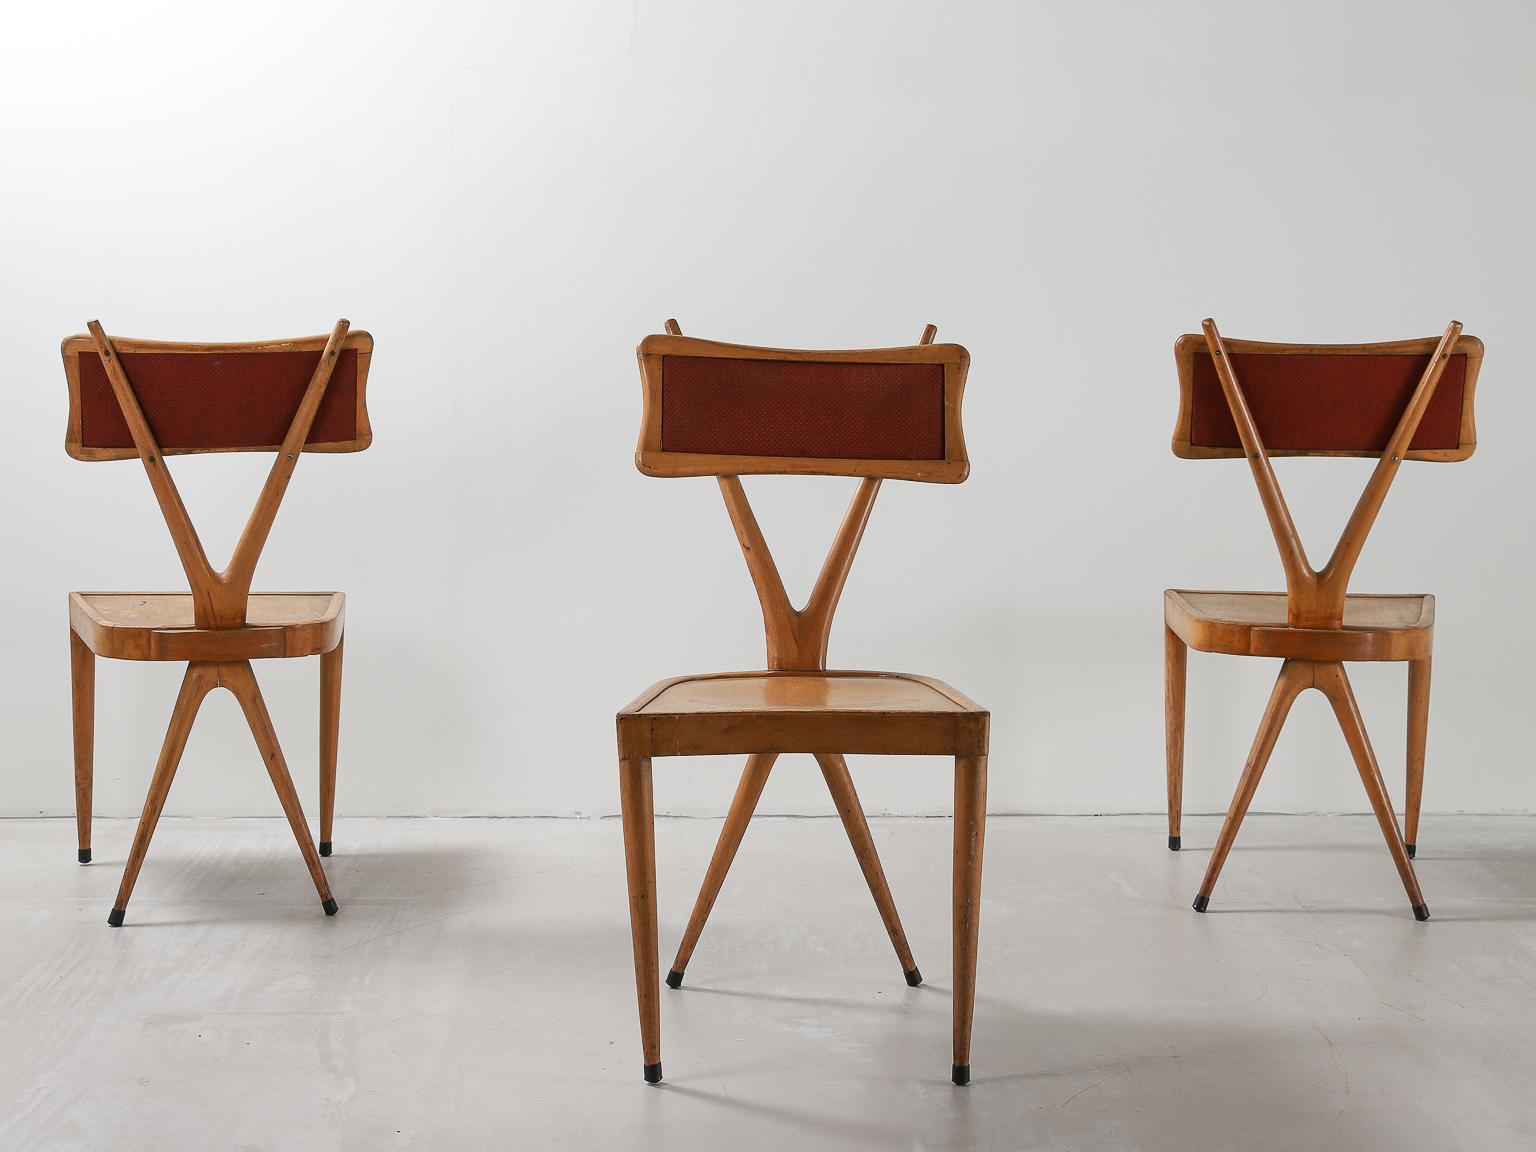 A set of 3 Vigorelli Gianni smooth, polished beech wood and fabric chairs from the 1950s, with characteristic X-shaped backrests, original rectangular upholstery and tapered legs.